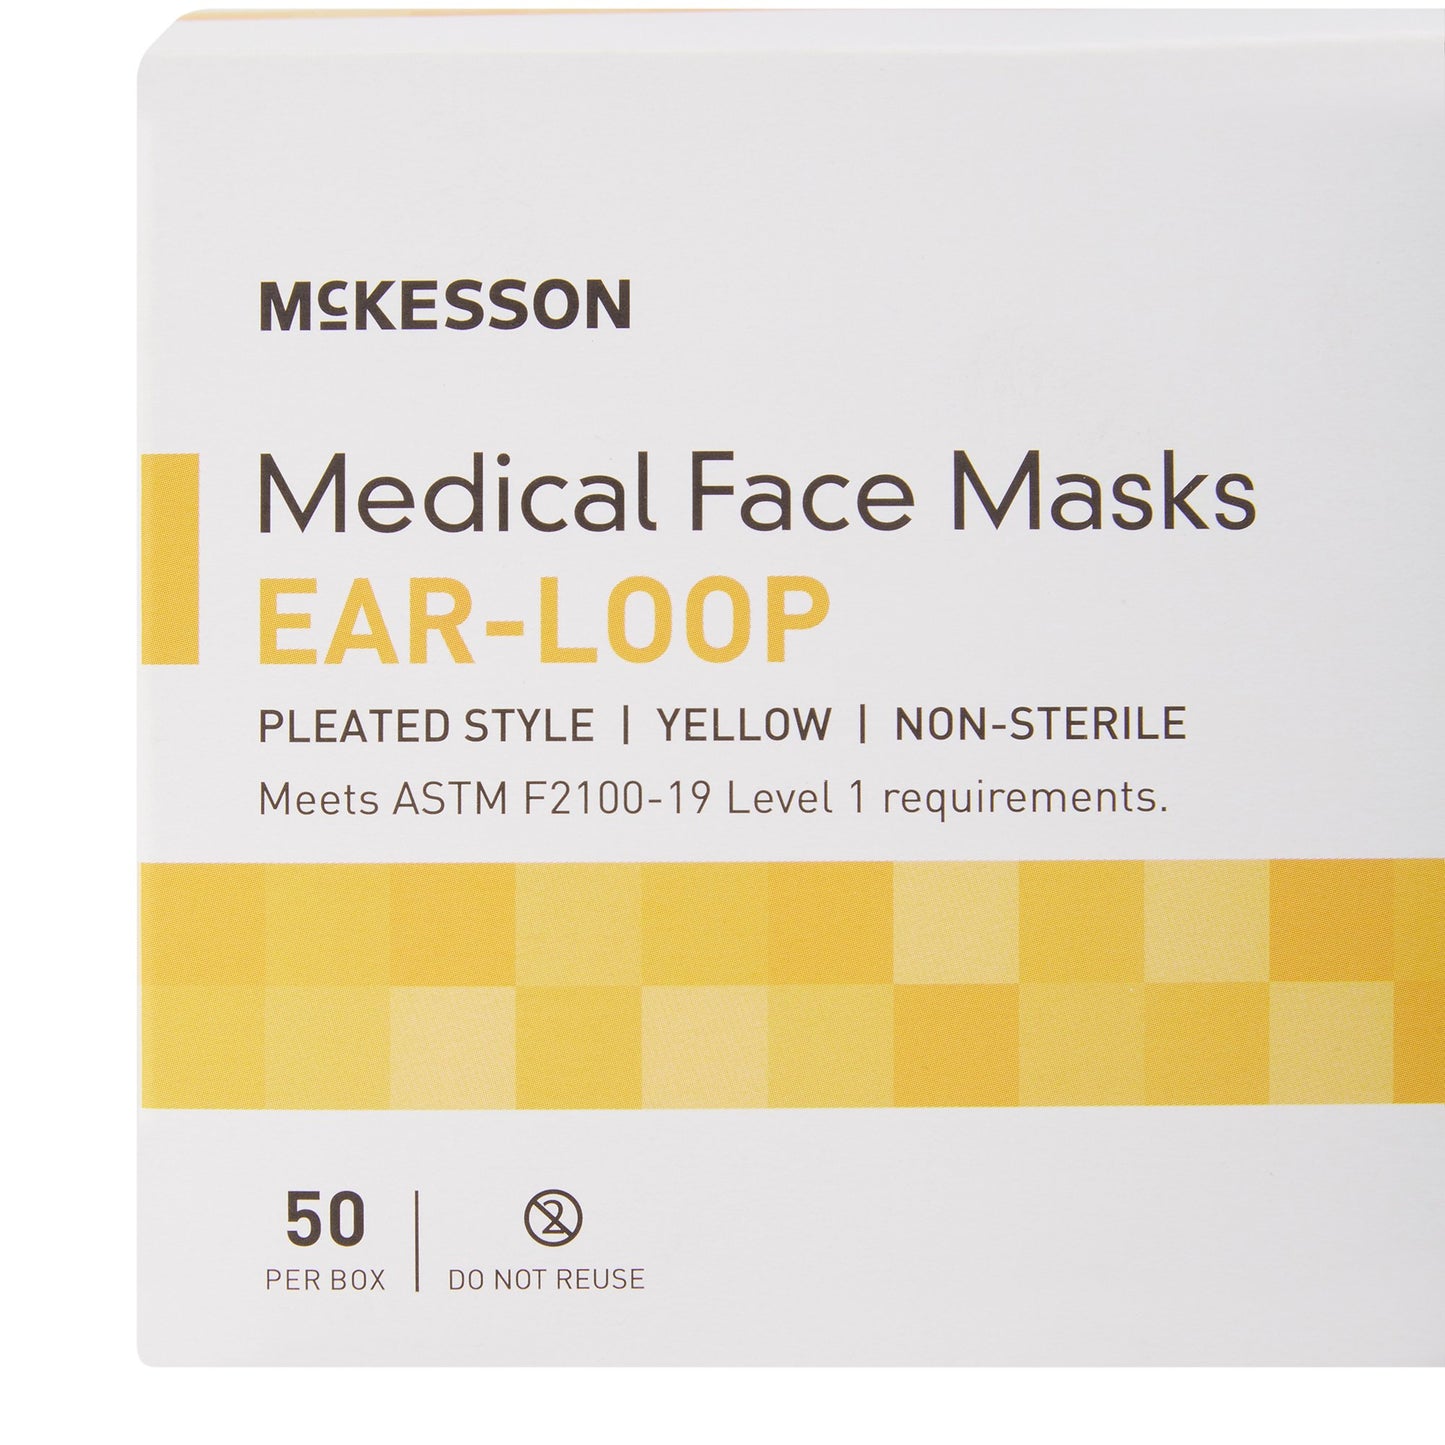 McKesson ASTM Level 1 Medical Face Masks, Yellow